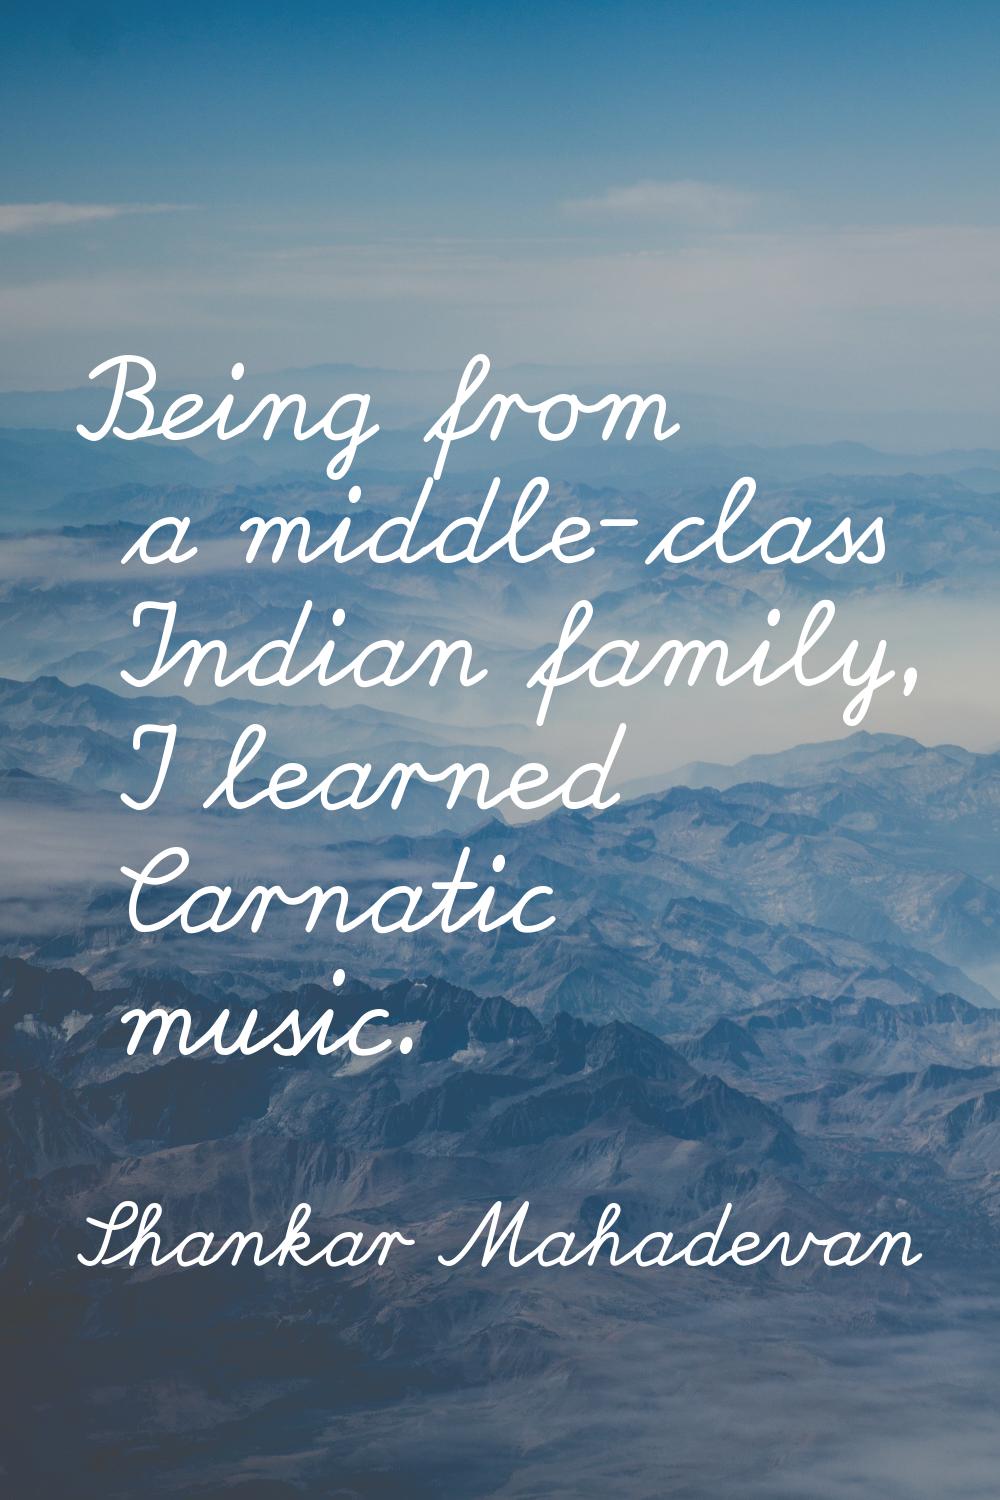 Being from a middle-class Indian family, I learned Carnatic music.